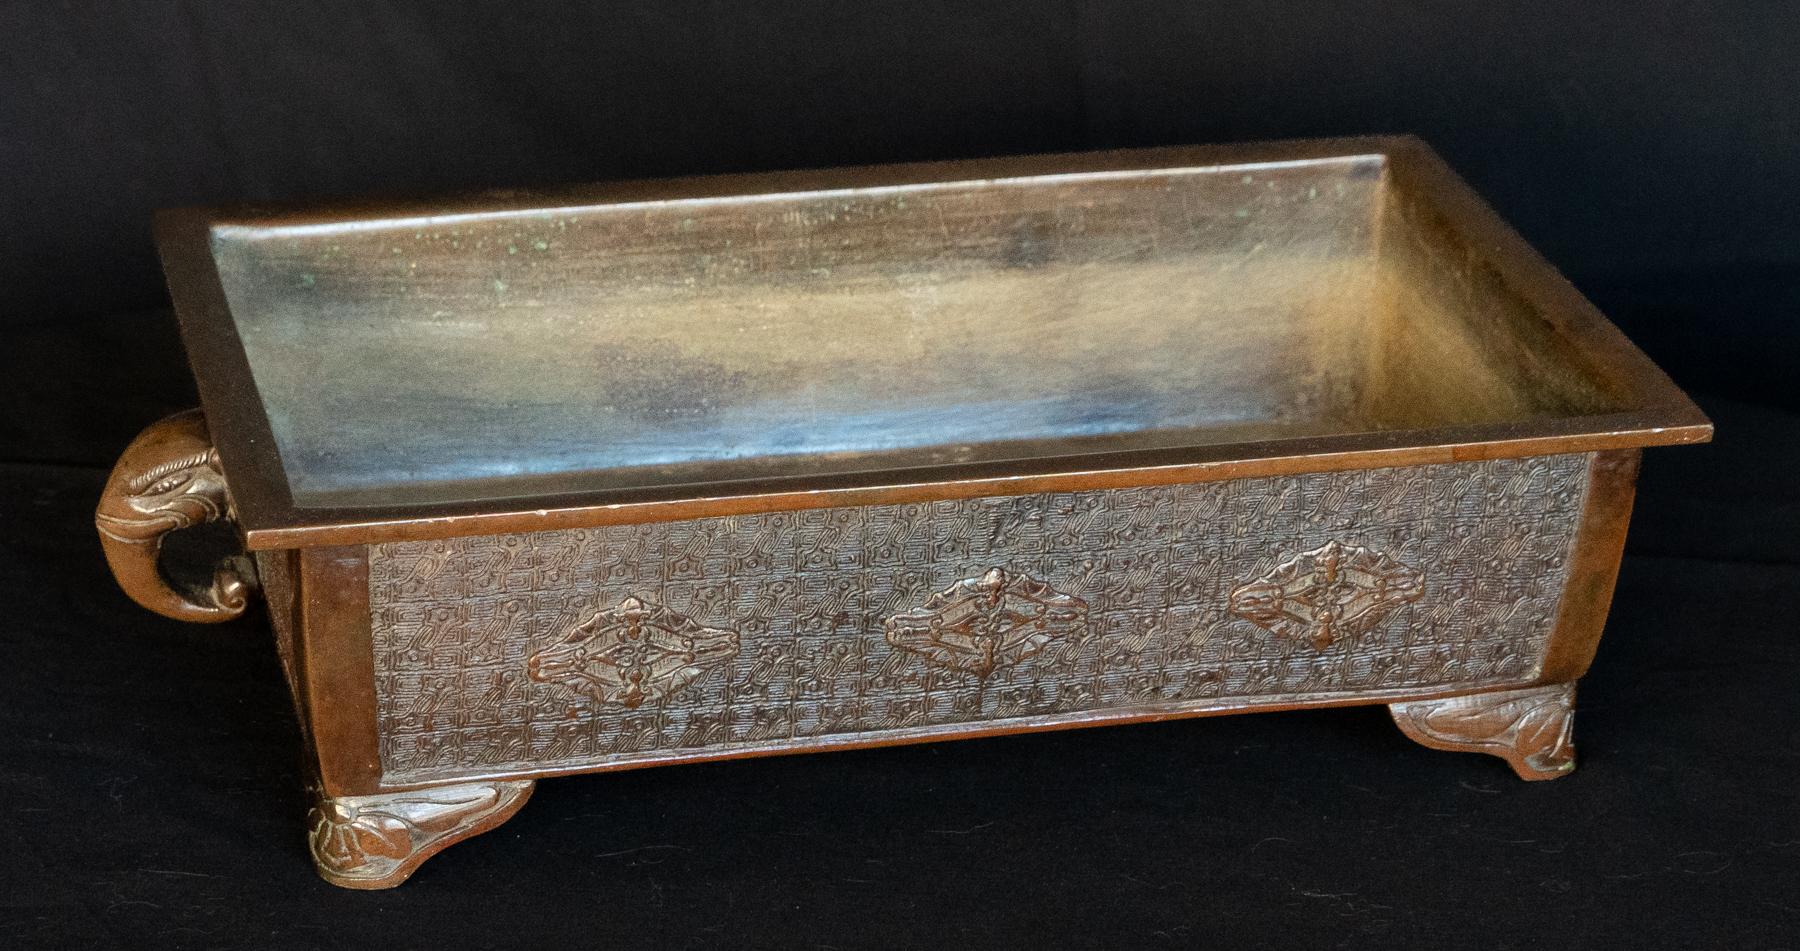 Japanese Meiji Period Bronze Incense Holder / Jardiniere. A substantial incense holder in the Chinese Ming style. Sides and bottom covered in a relief decoration overall., with a warm natural bronze patina. Raised on shaped corner bracket feet with